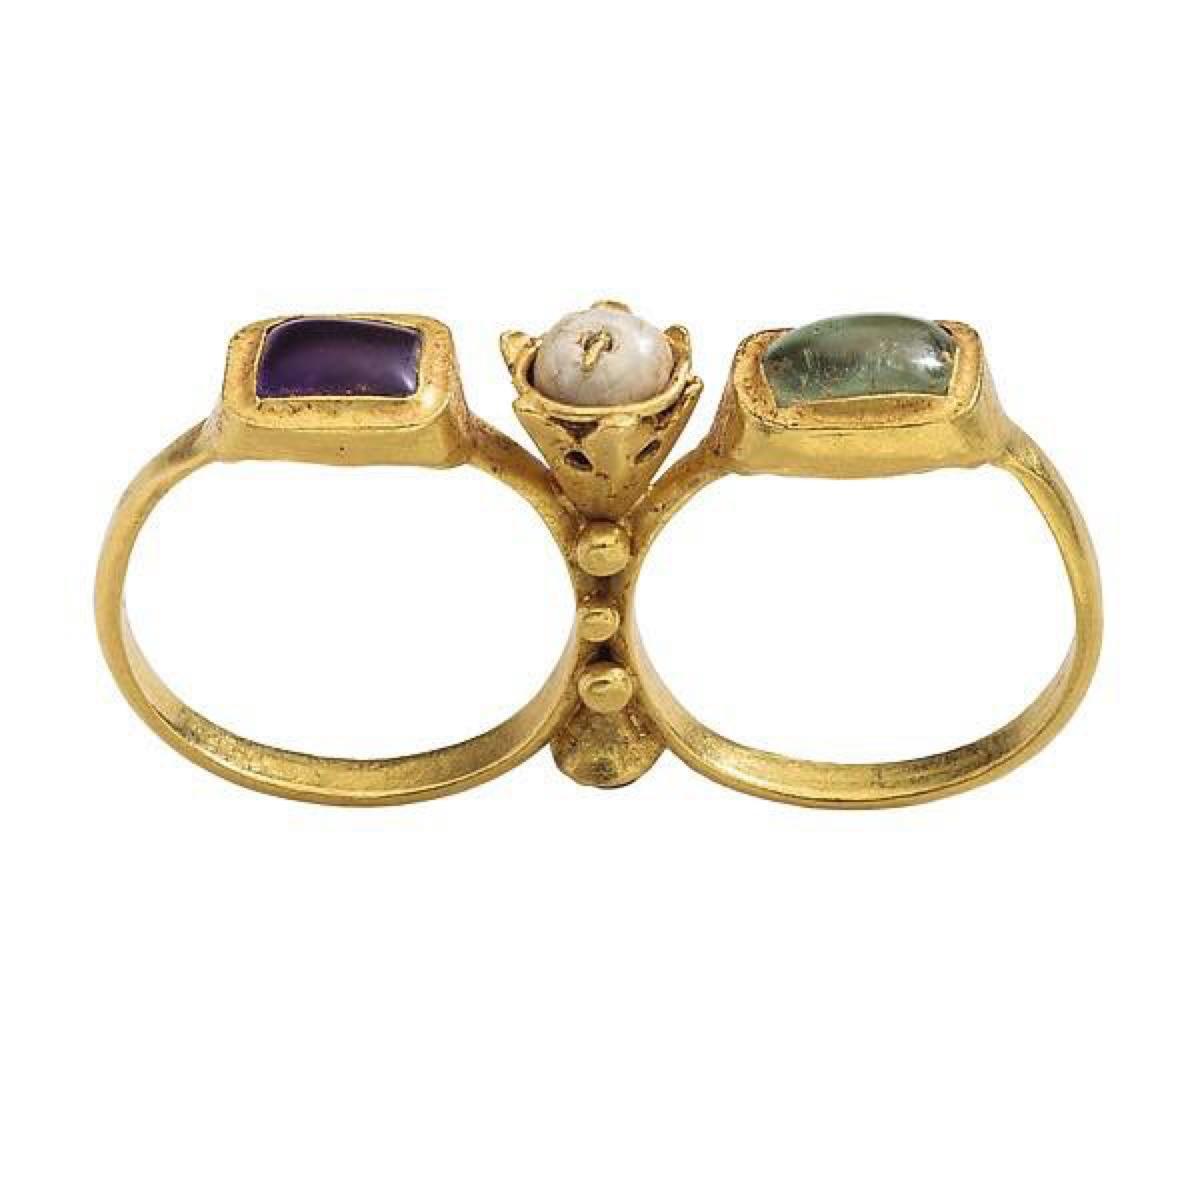 Byzantine Two-Finger Ring, early 6th century, Gold, amethyst, emerald, pearl. Griffin Collection© The Metropolitan Museum of Art.jpg